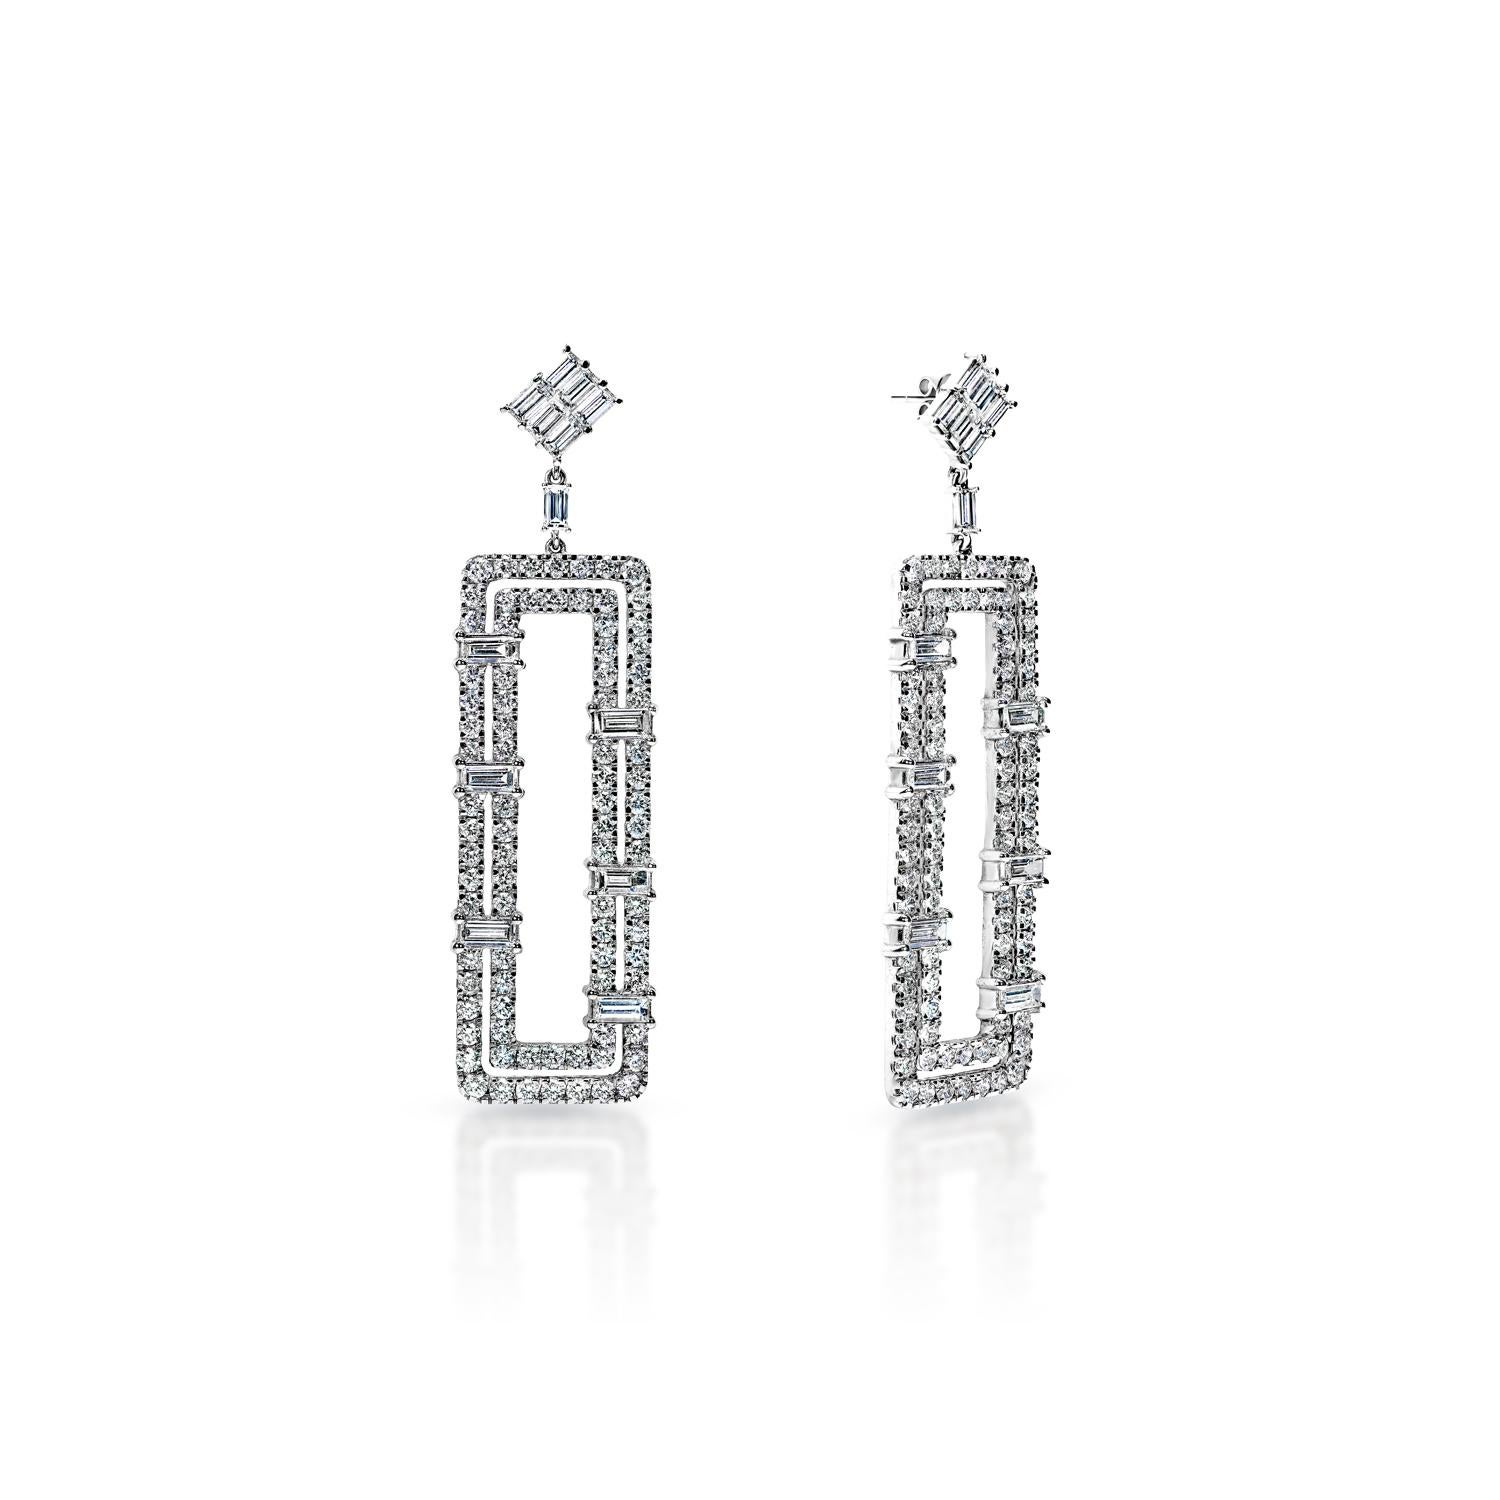 Diamond Hanging Earrings For Ladies:

Carat Weight: 11.89 Carats
Shape: Combined Mixed Shape (CMB)
Metal: 14Karat White Gold
Metal Weight: 22.40 Grams
Style: Hanging Earrings